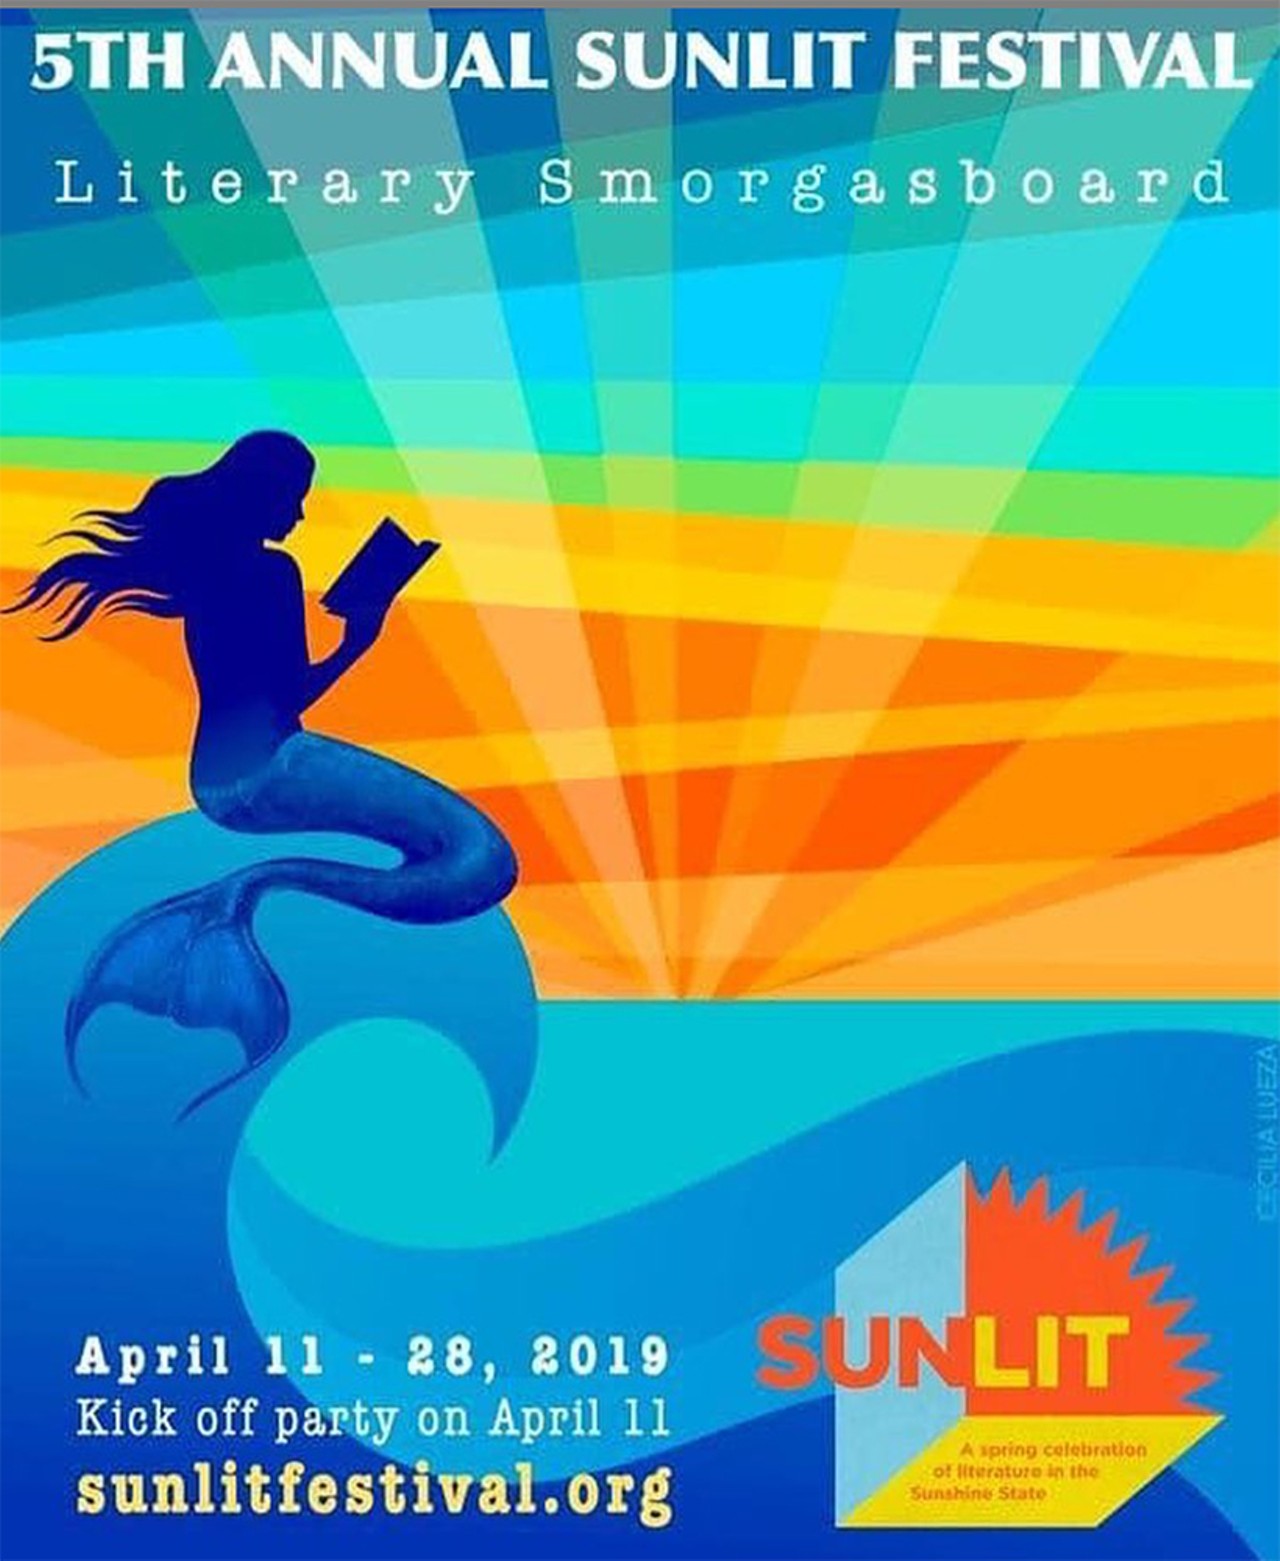  Celebrate the kickoff of the 5th Annual SunLit Festival at the Chihuly Collection in St. Pete Roam the collection, hang with your friends, and enjoy some beer/wine and light hors d&#146;oeuvres. Check out the full list of SunLit events  here.Thurs., Apr. 11, 7-9 p.m.
Poster design by Cecilia Lueza, via Instagram @keepstpetelit